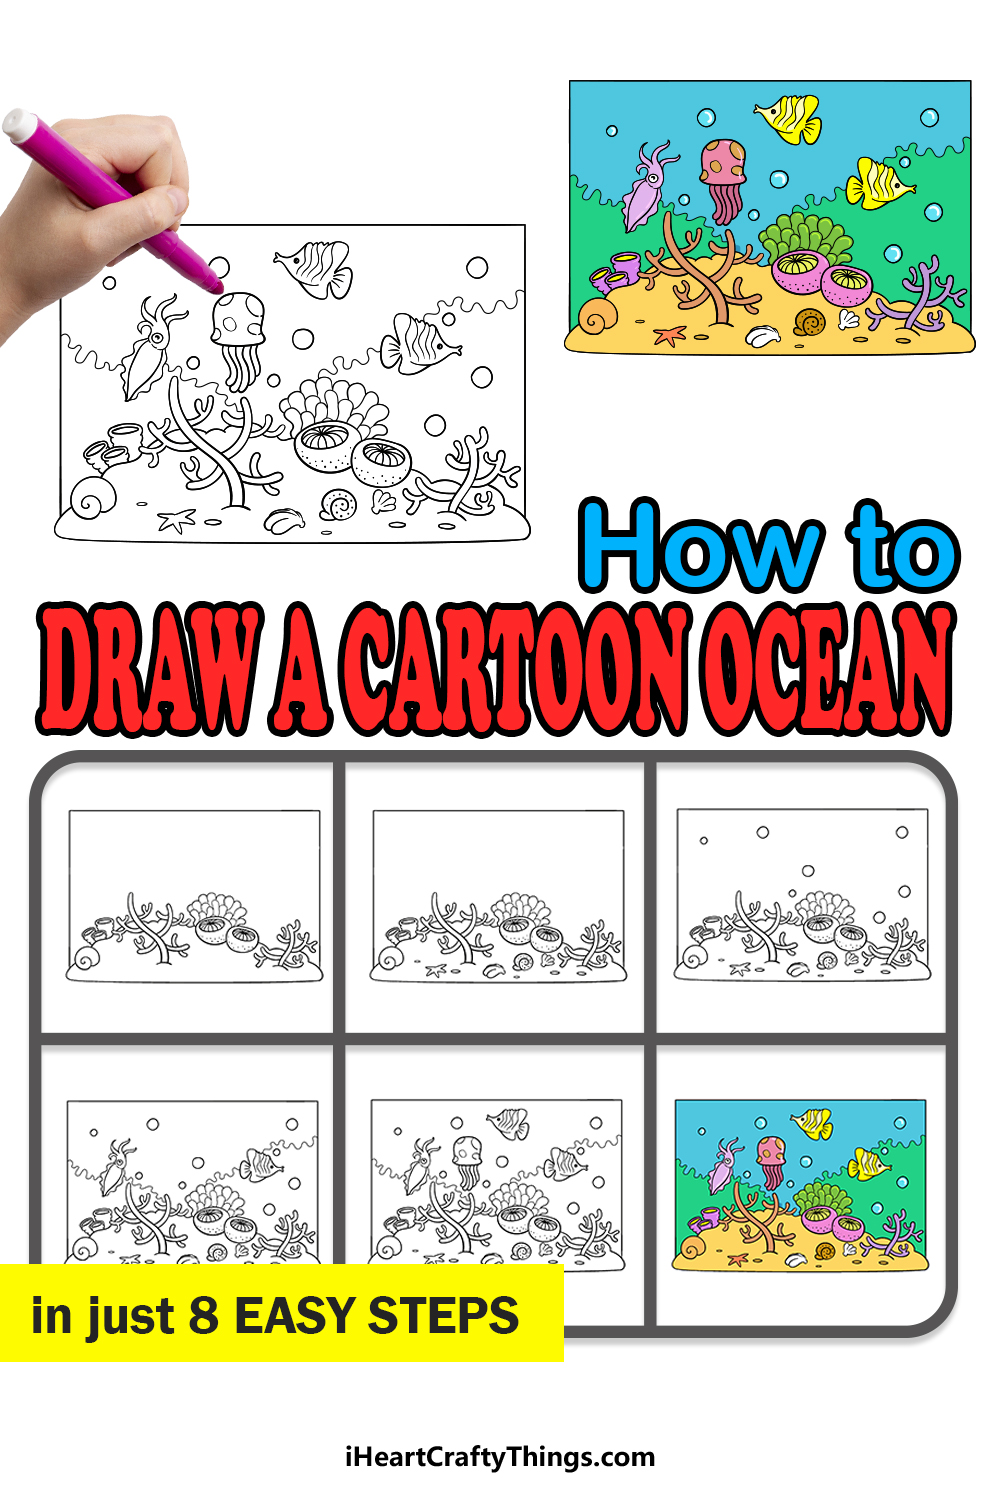 how to draw a cartoon ocean in 8 easy steps